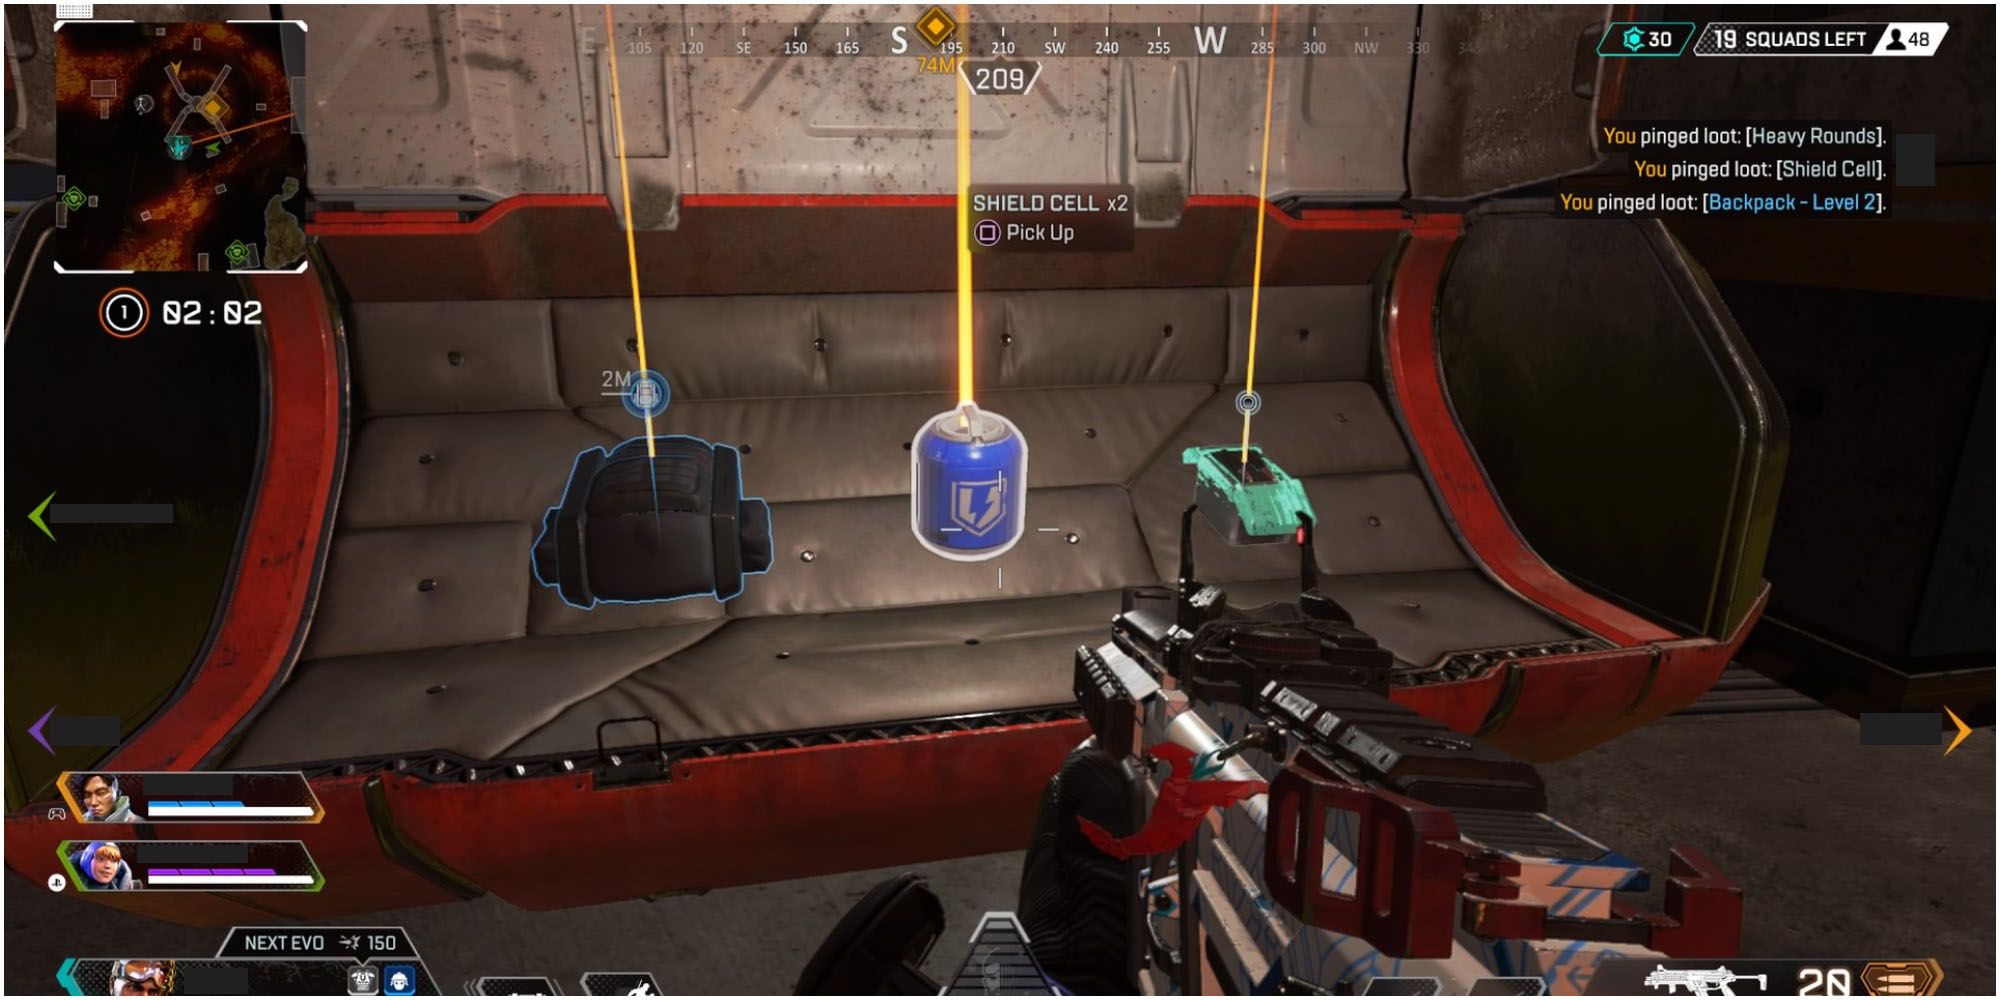 Apex Legends Open Loot Bin Pinged Loot Shield Cell And Backpack